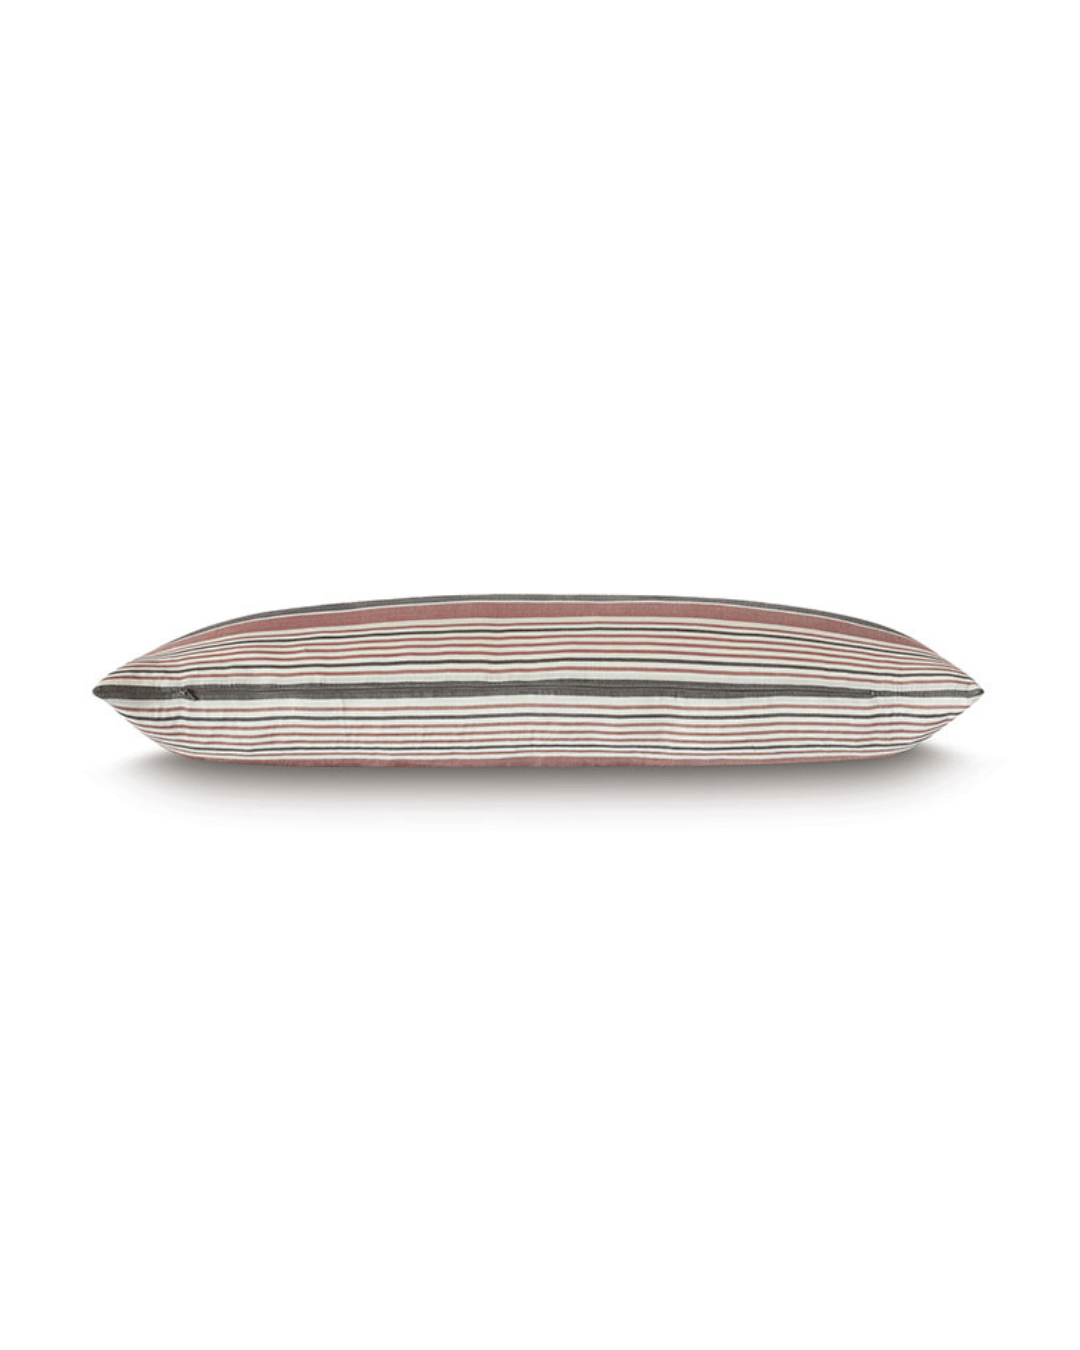 Bungalow-style Chil Striped Pillow with hues of burgundy, cream, and gray, isolated on a white background. The pillow is viewed from the side, emphasizing its thin profile.